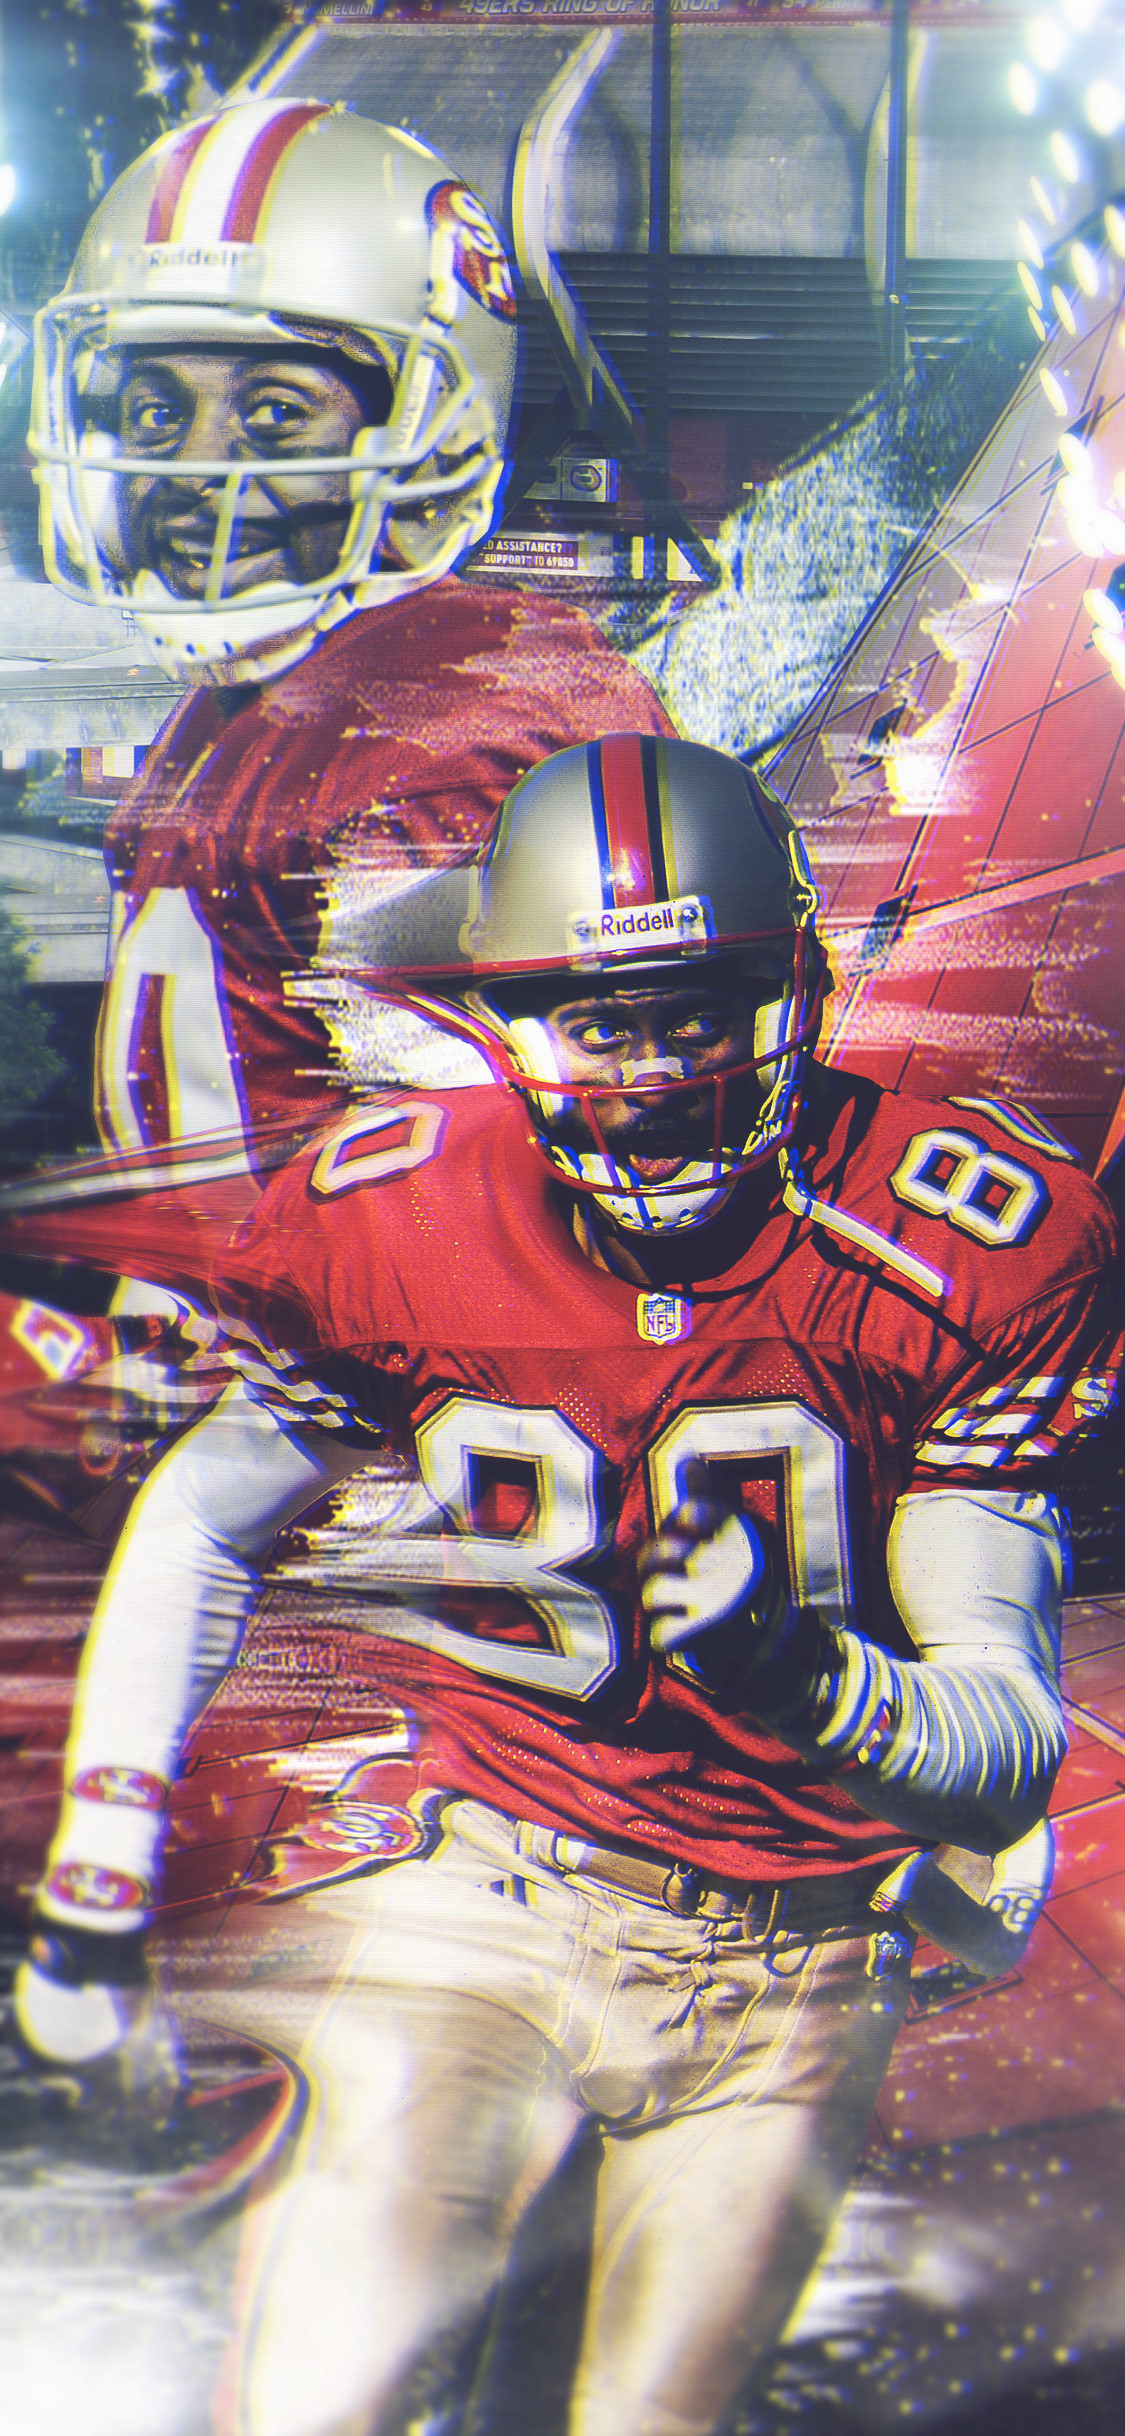 Jerry Rice Wallpapers - Top Free Jerry Rice Backgrounds - WallpaperAccess